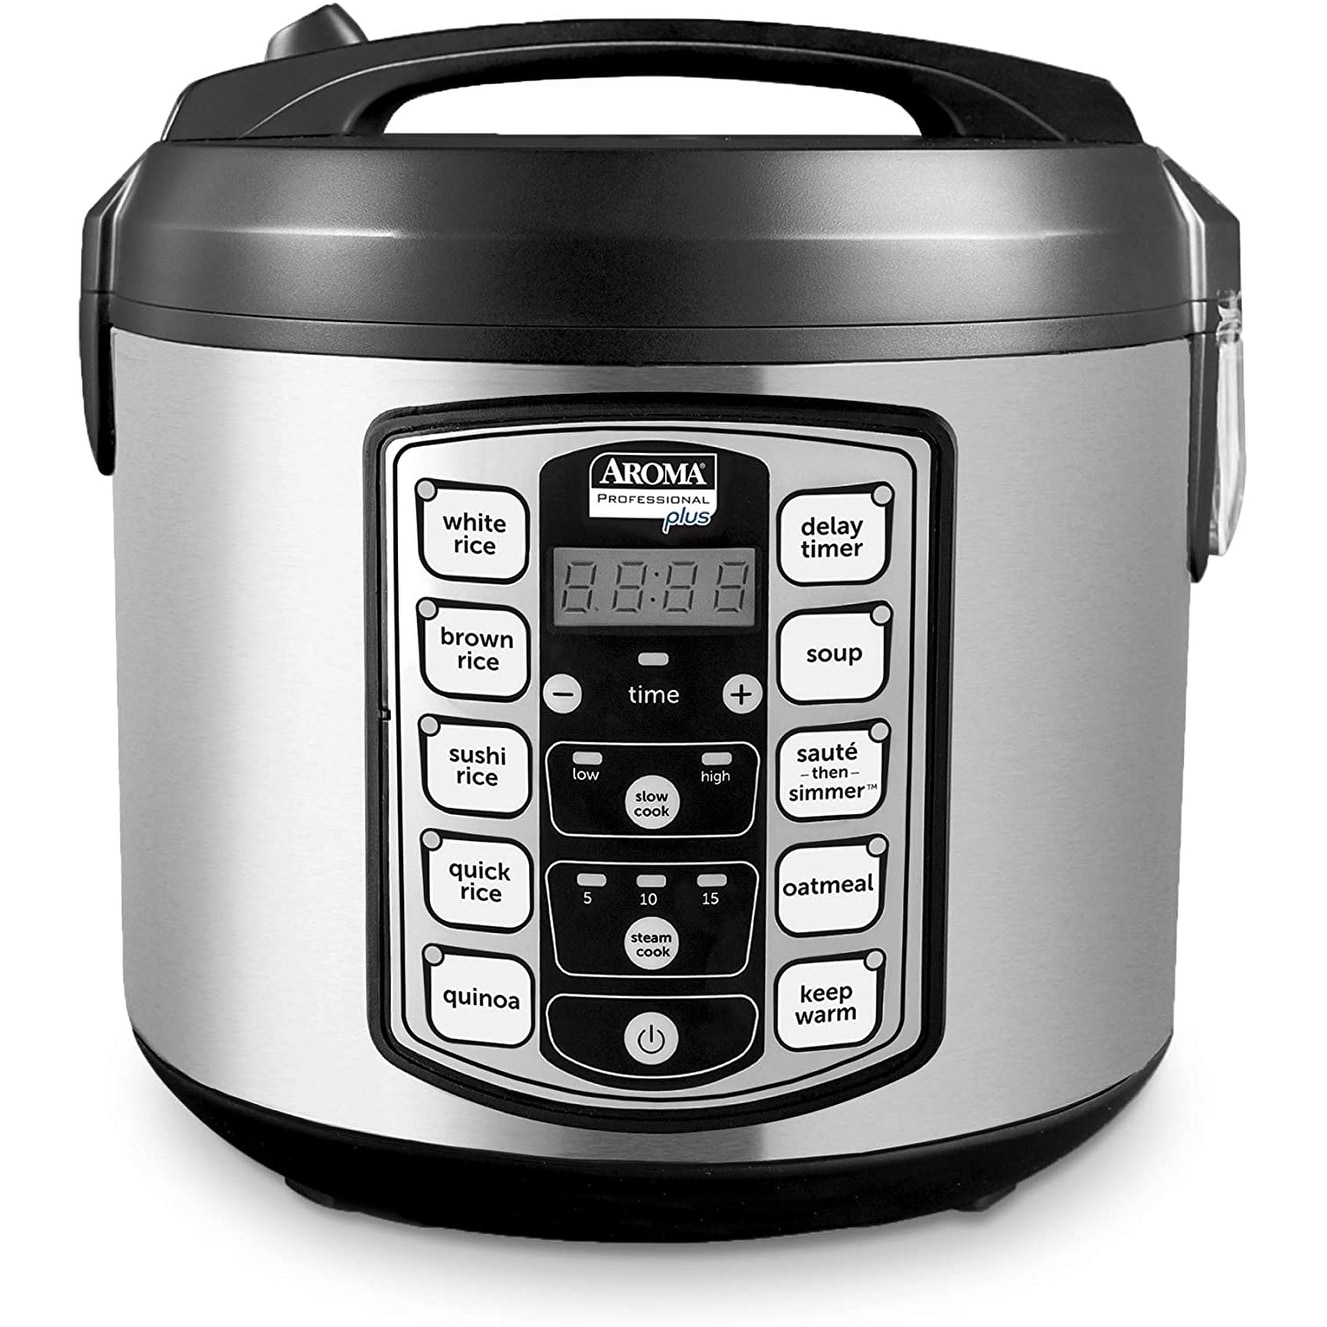  Customer reviews: Hello Kitty Slow Cooker - Pink (APP